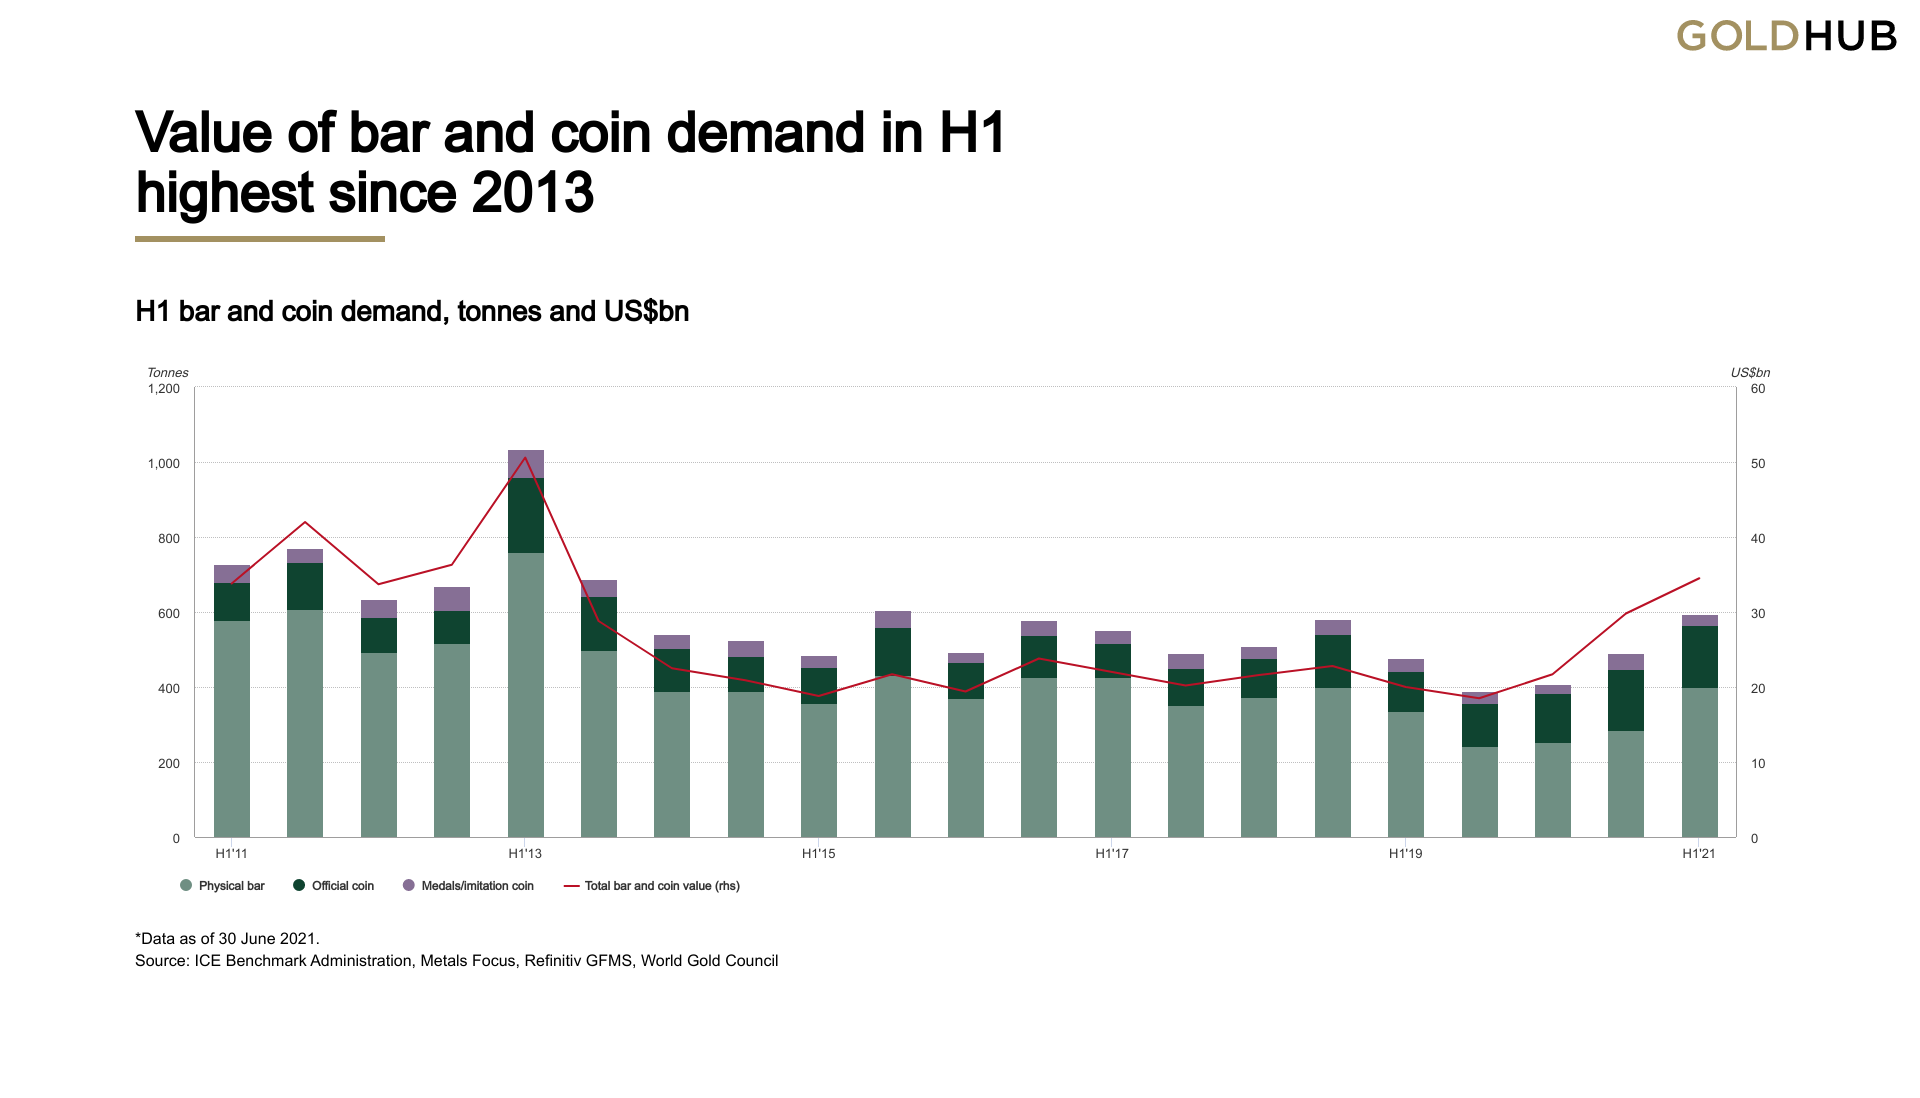 Value of bar and coin demand in H1 highest since 2013